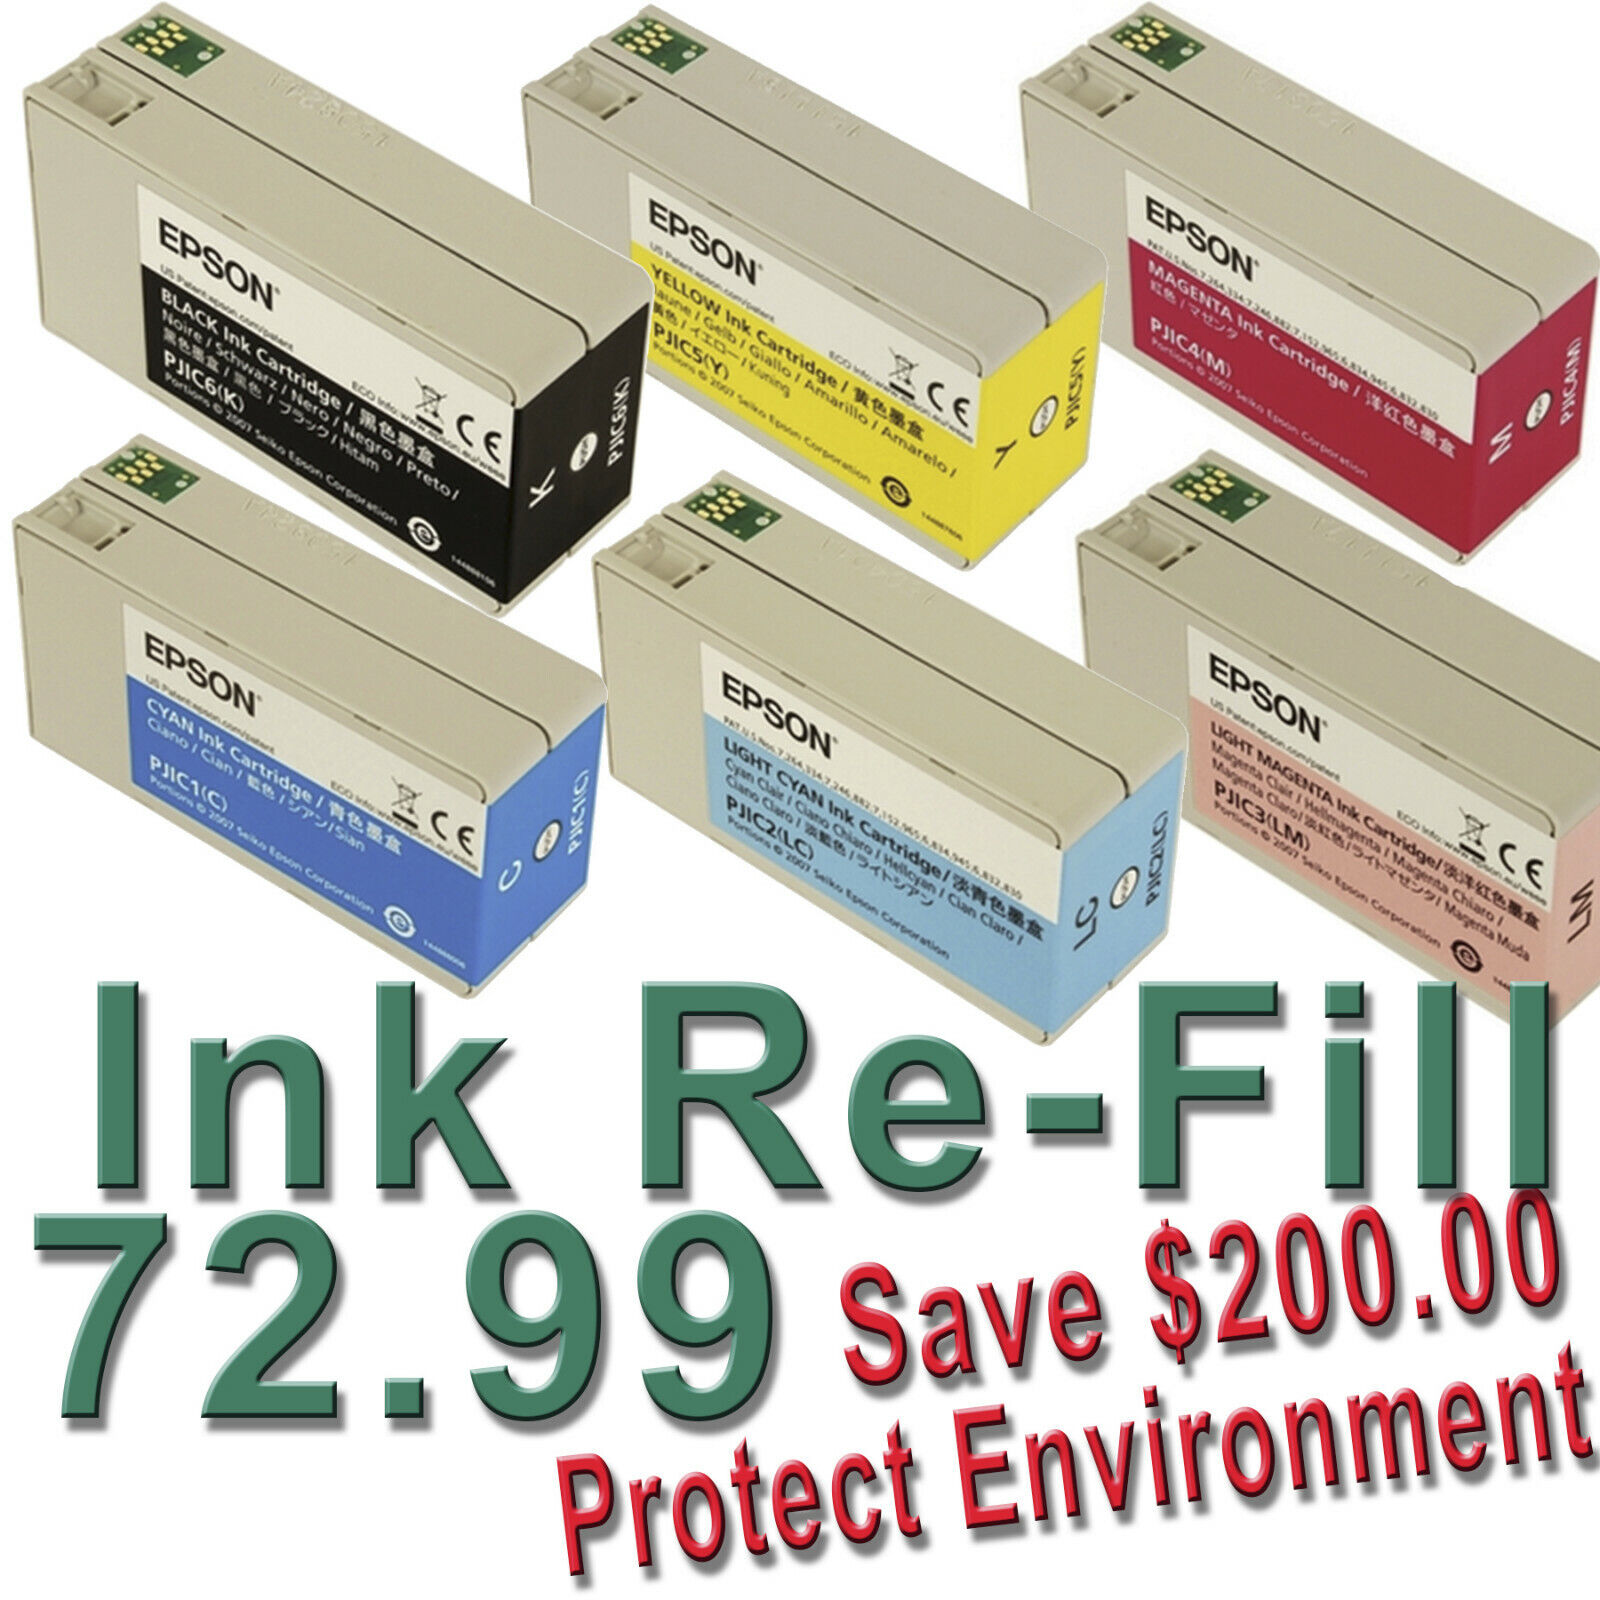 REFILL YOUR Used Epson Discproducer PP-100/PP-50 Ink Cartridges Save $200.00